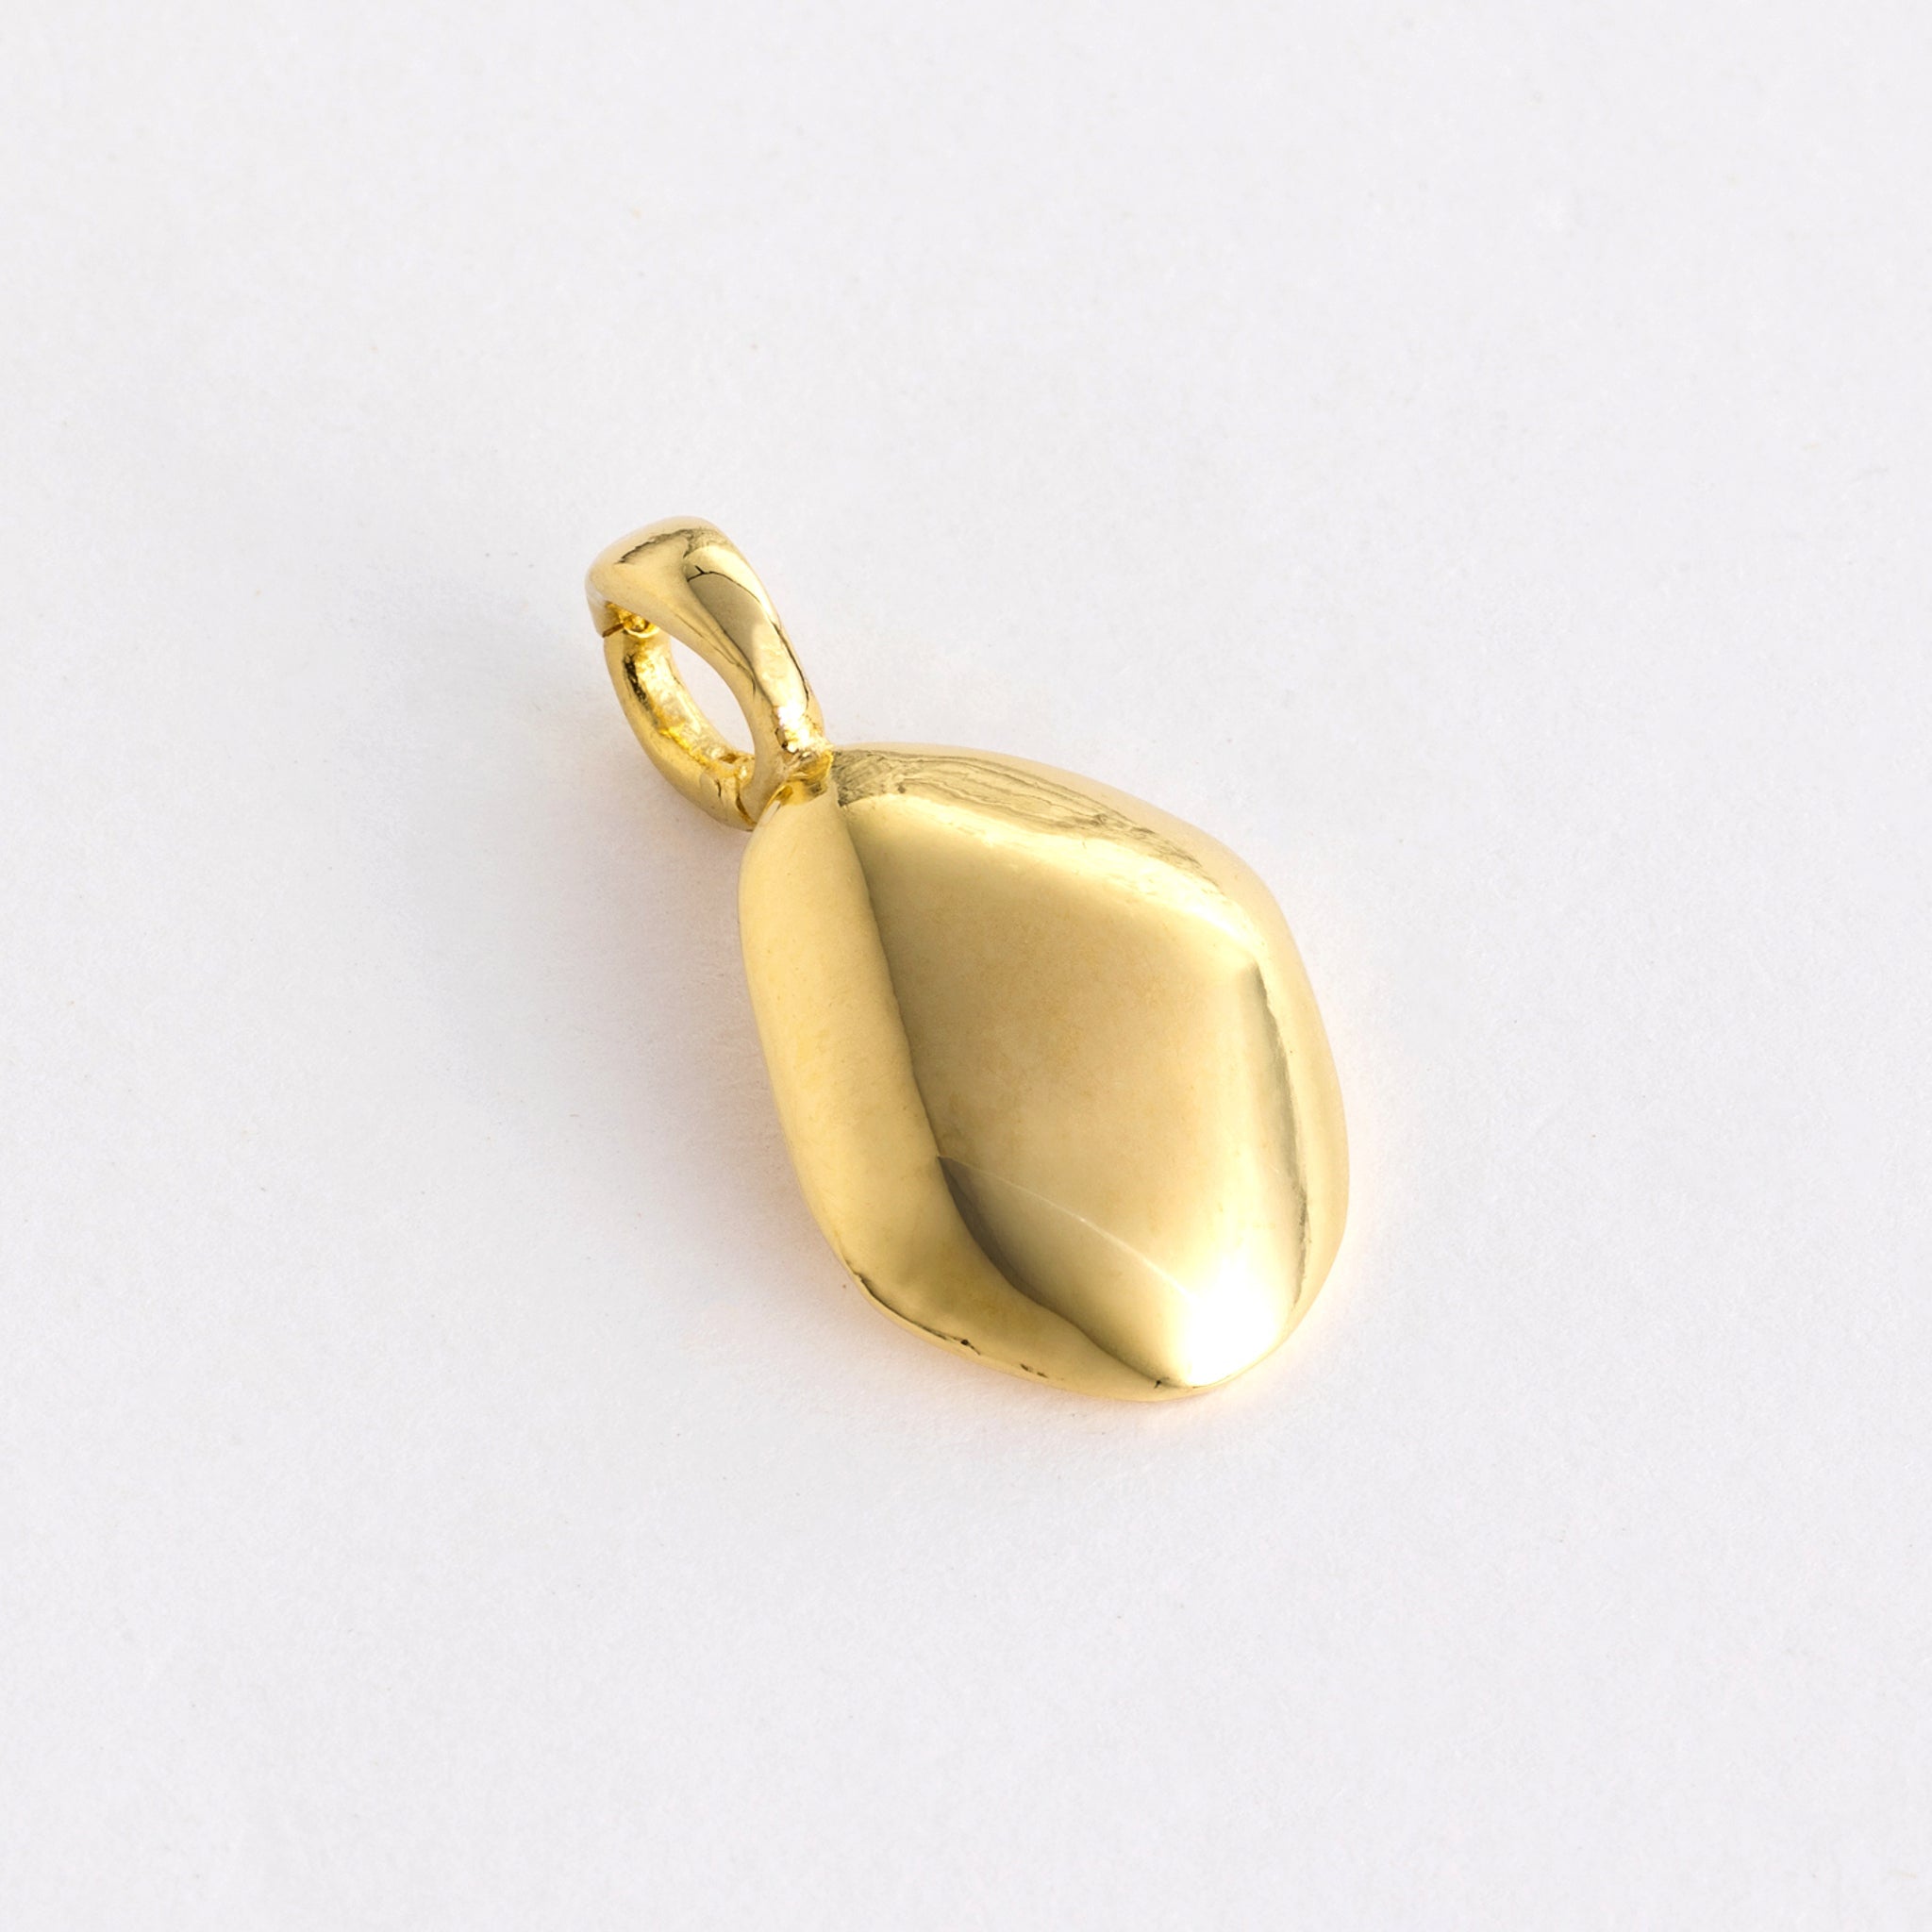 Charm features a handcut natural pebble shape and is crafted from sterling silver or 18ct gold vermeil.